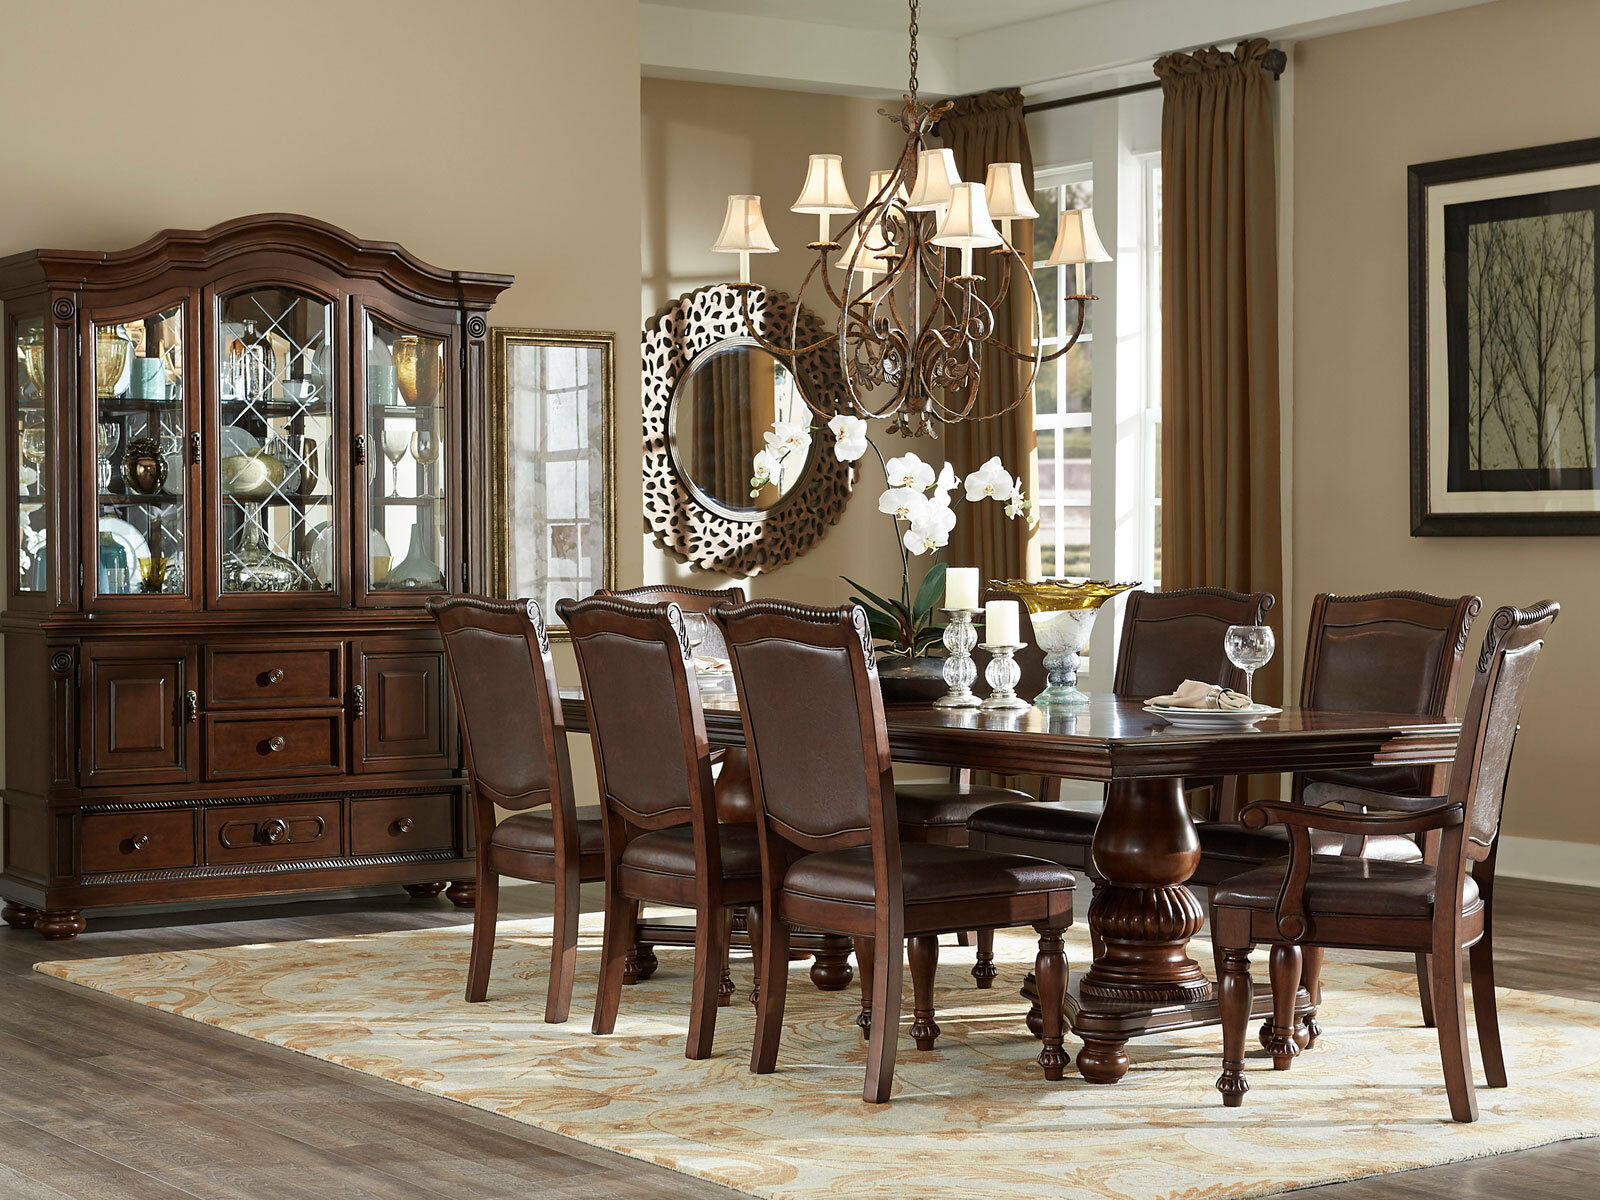 8 brown dining room chairs